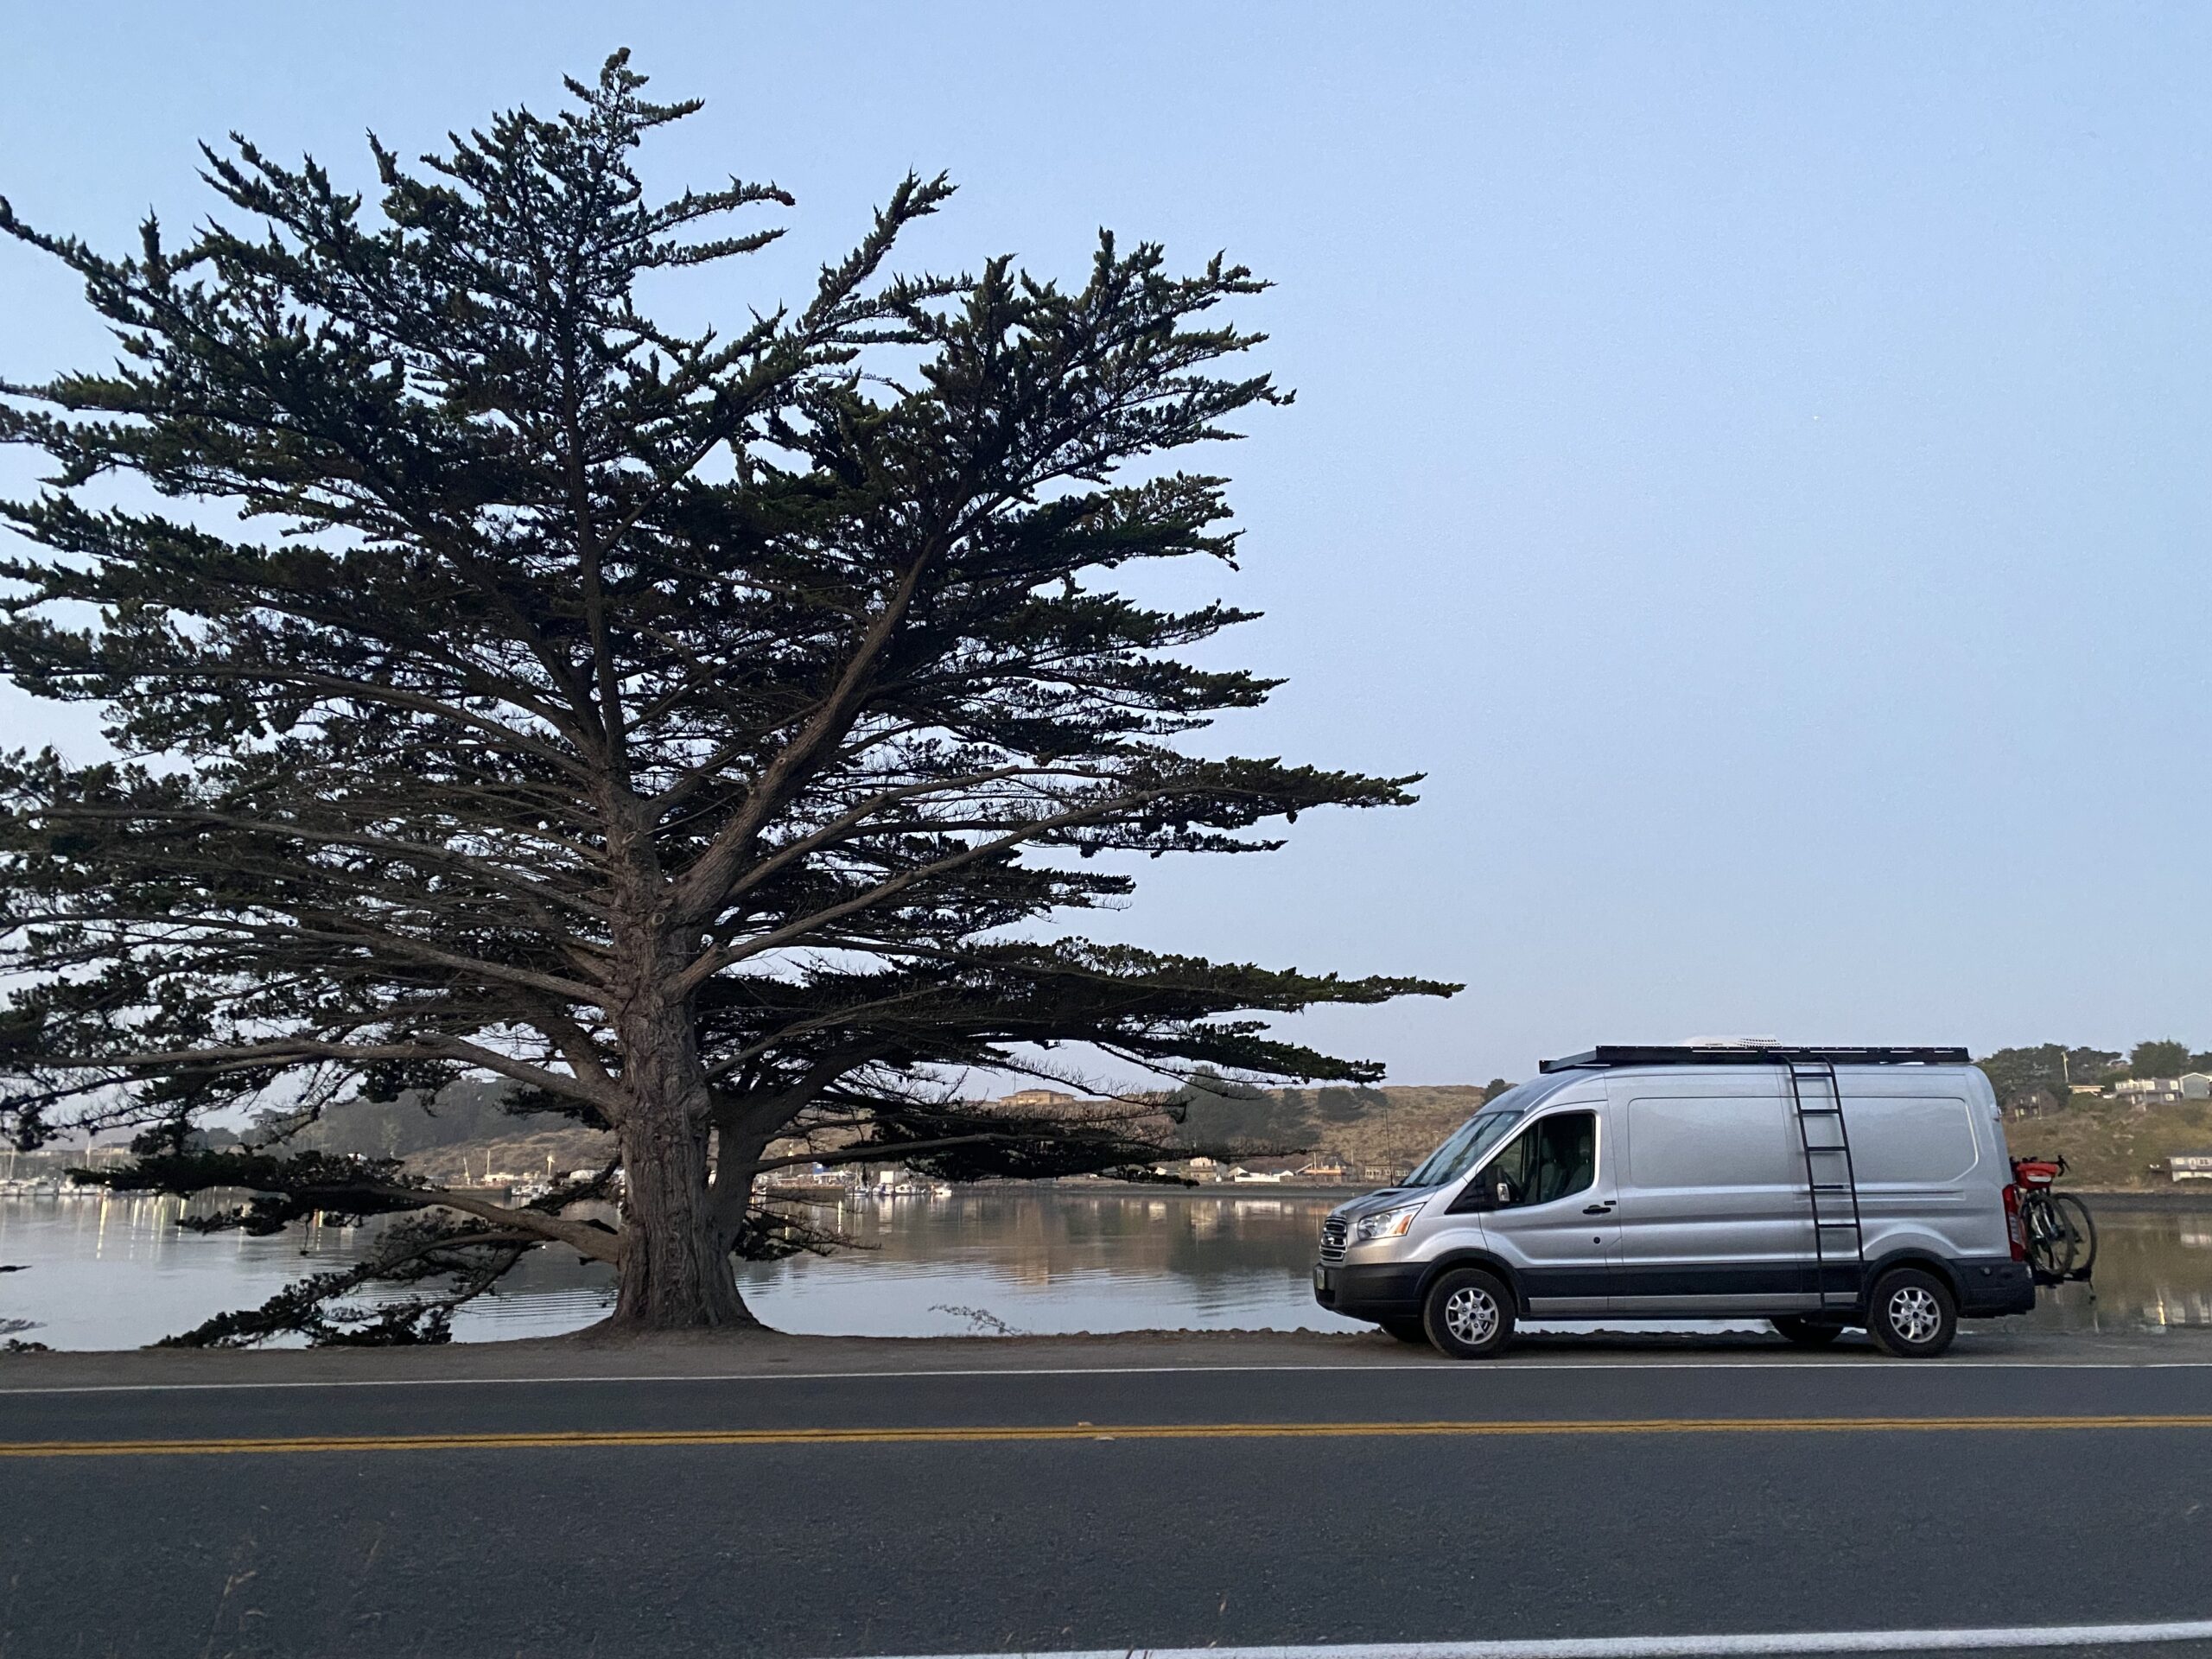 A grey van parked on the water next to a large tree.